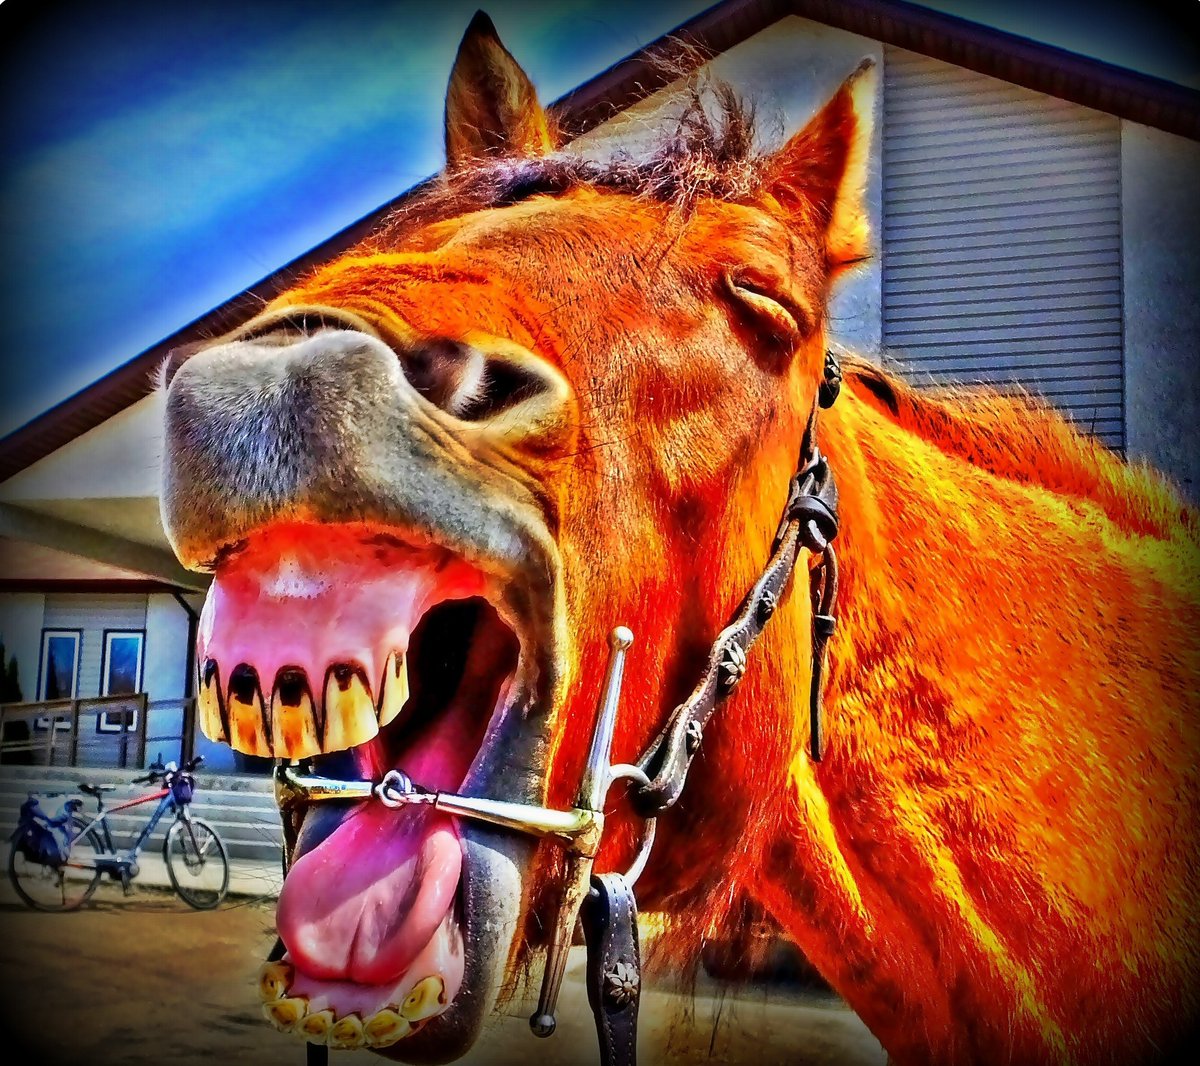 'Laughing at Me' - a Little Back in Time in Ste. Anne, Manitoba #horse #laughing #laugh #horsephotography #candidphotography #ebike #cubebikes #cycling #DawsonTrail #SteAnne #SainteAnne #Manitoba #southeastern #eastman #Canada